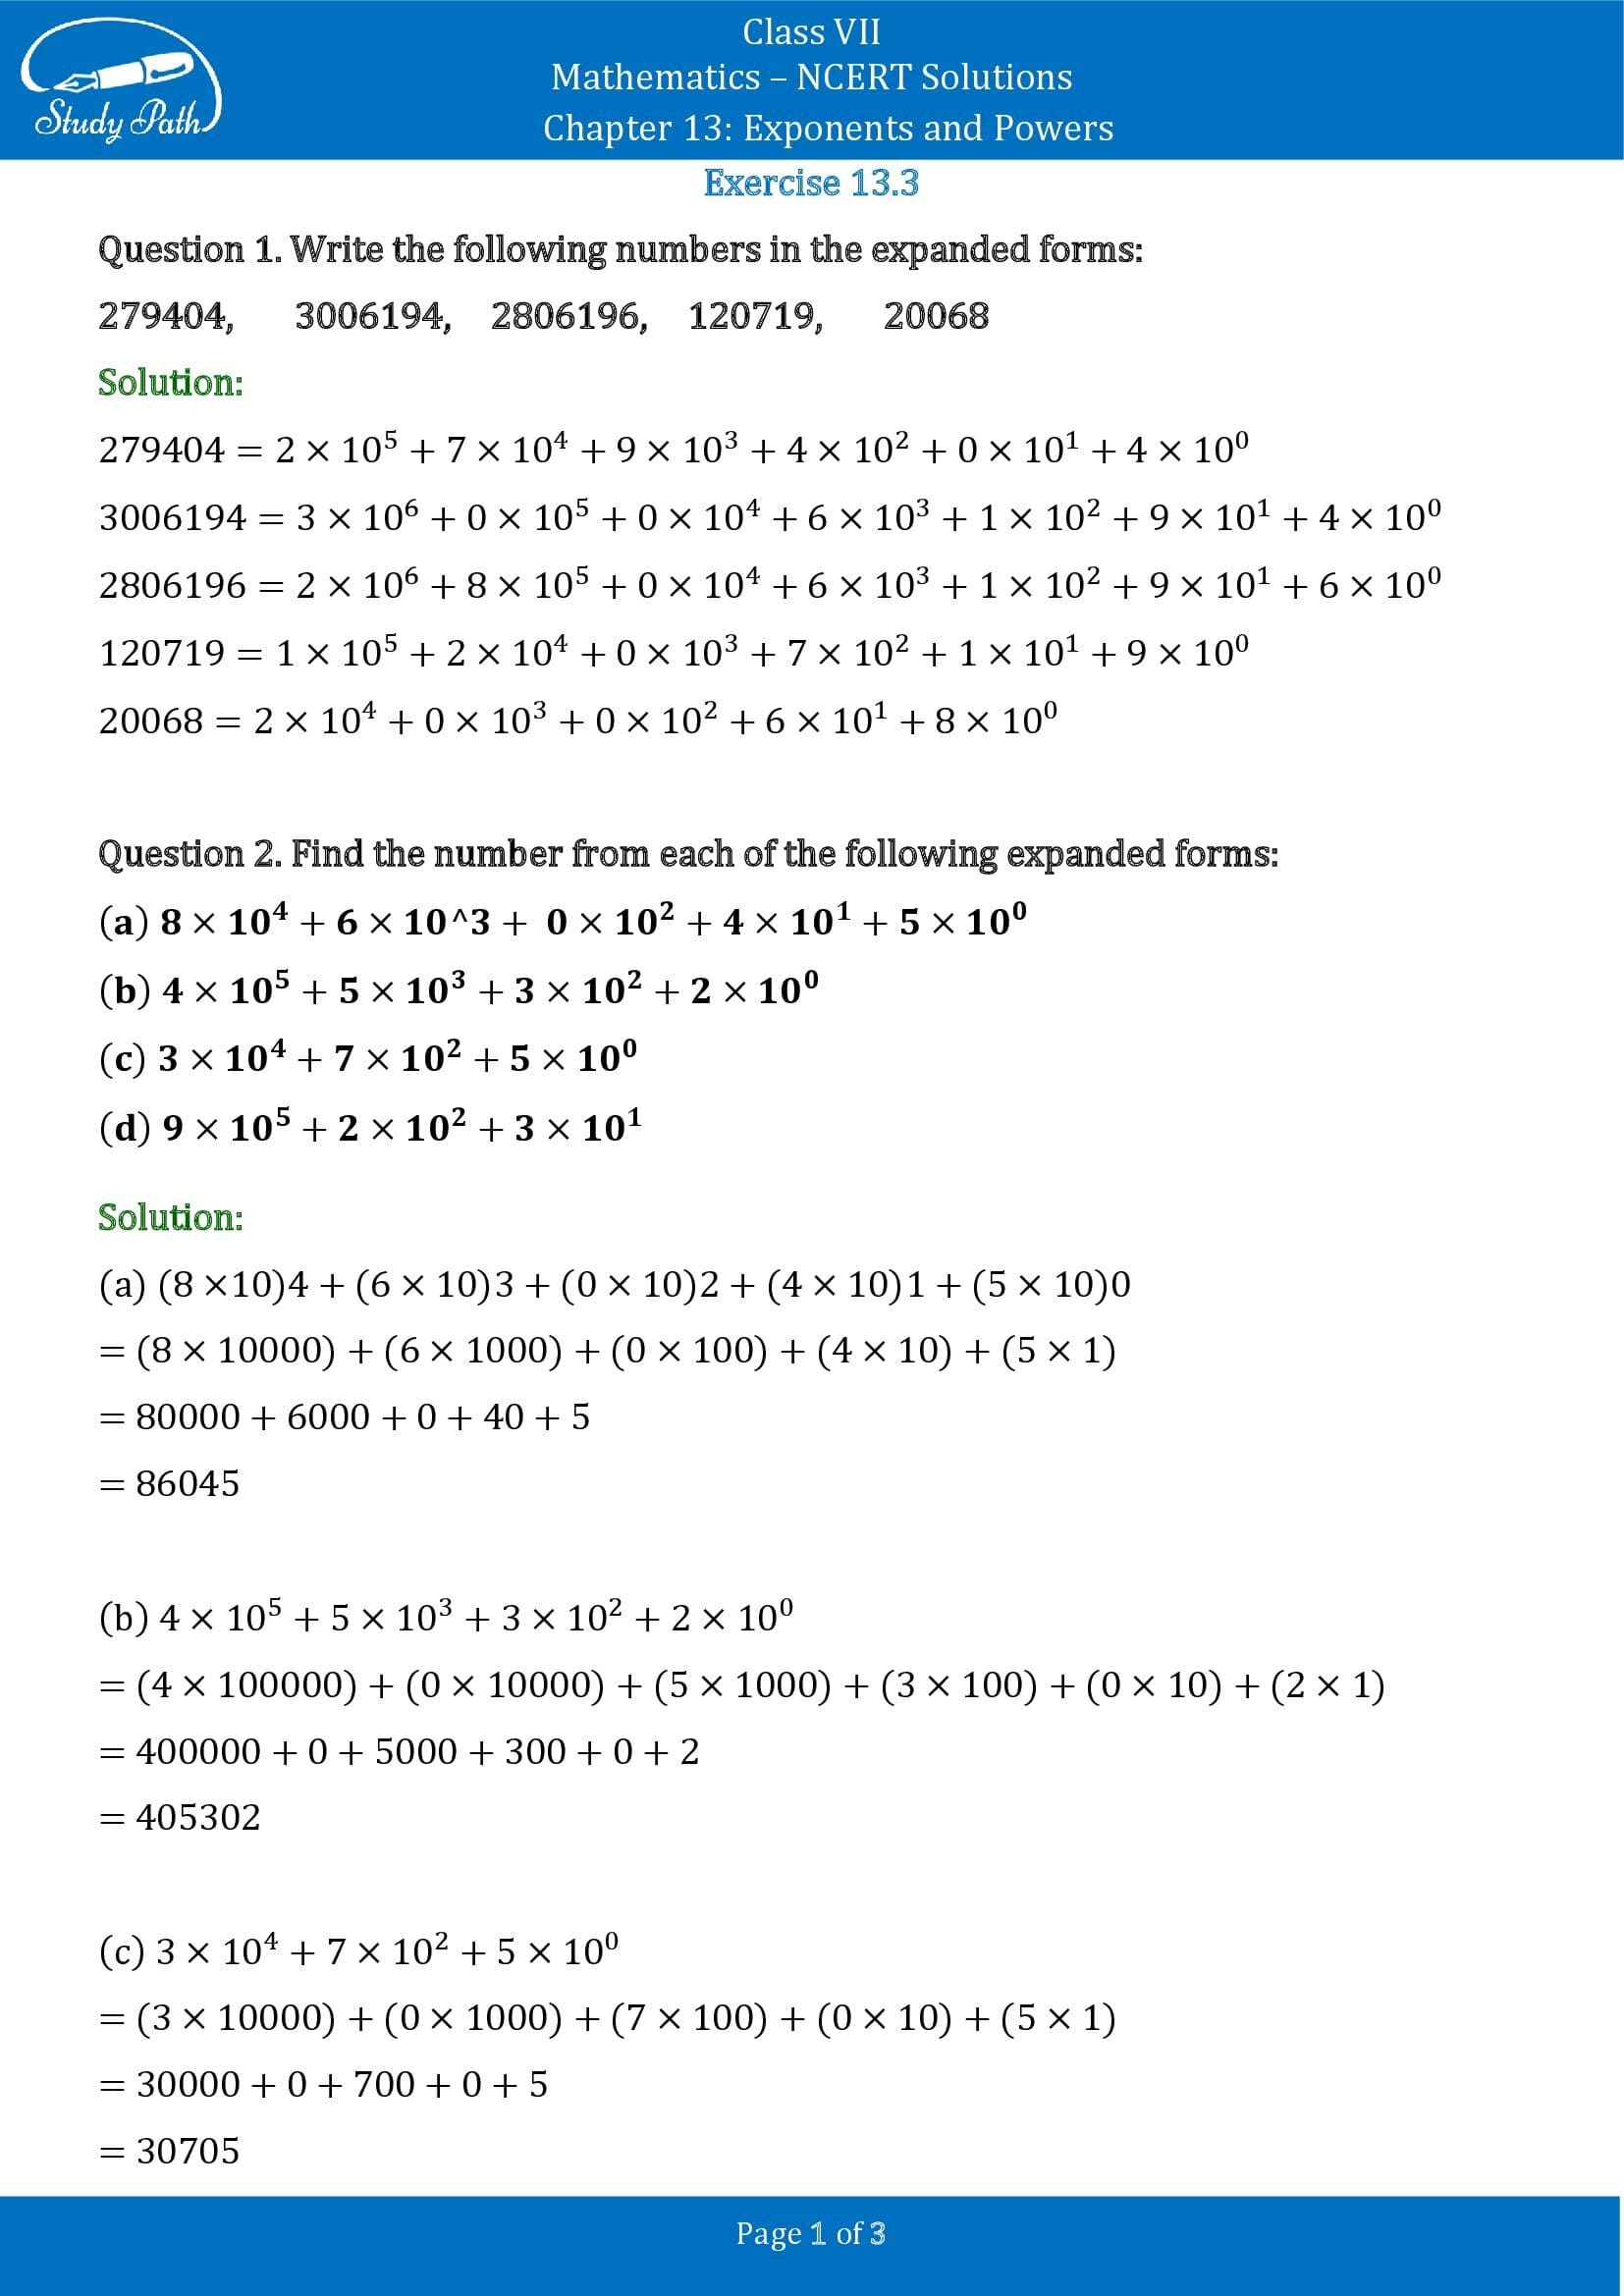 NCERT Solutions for Class 7 Maths Chapter 13 Exponents and Powers Exercise 13.3 00001